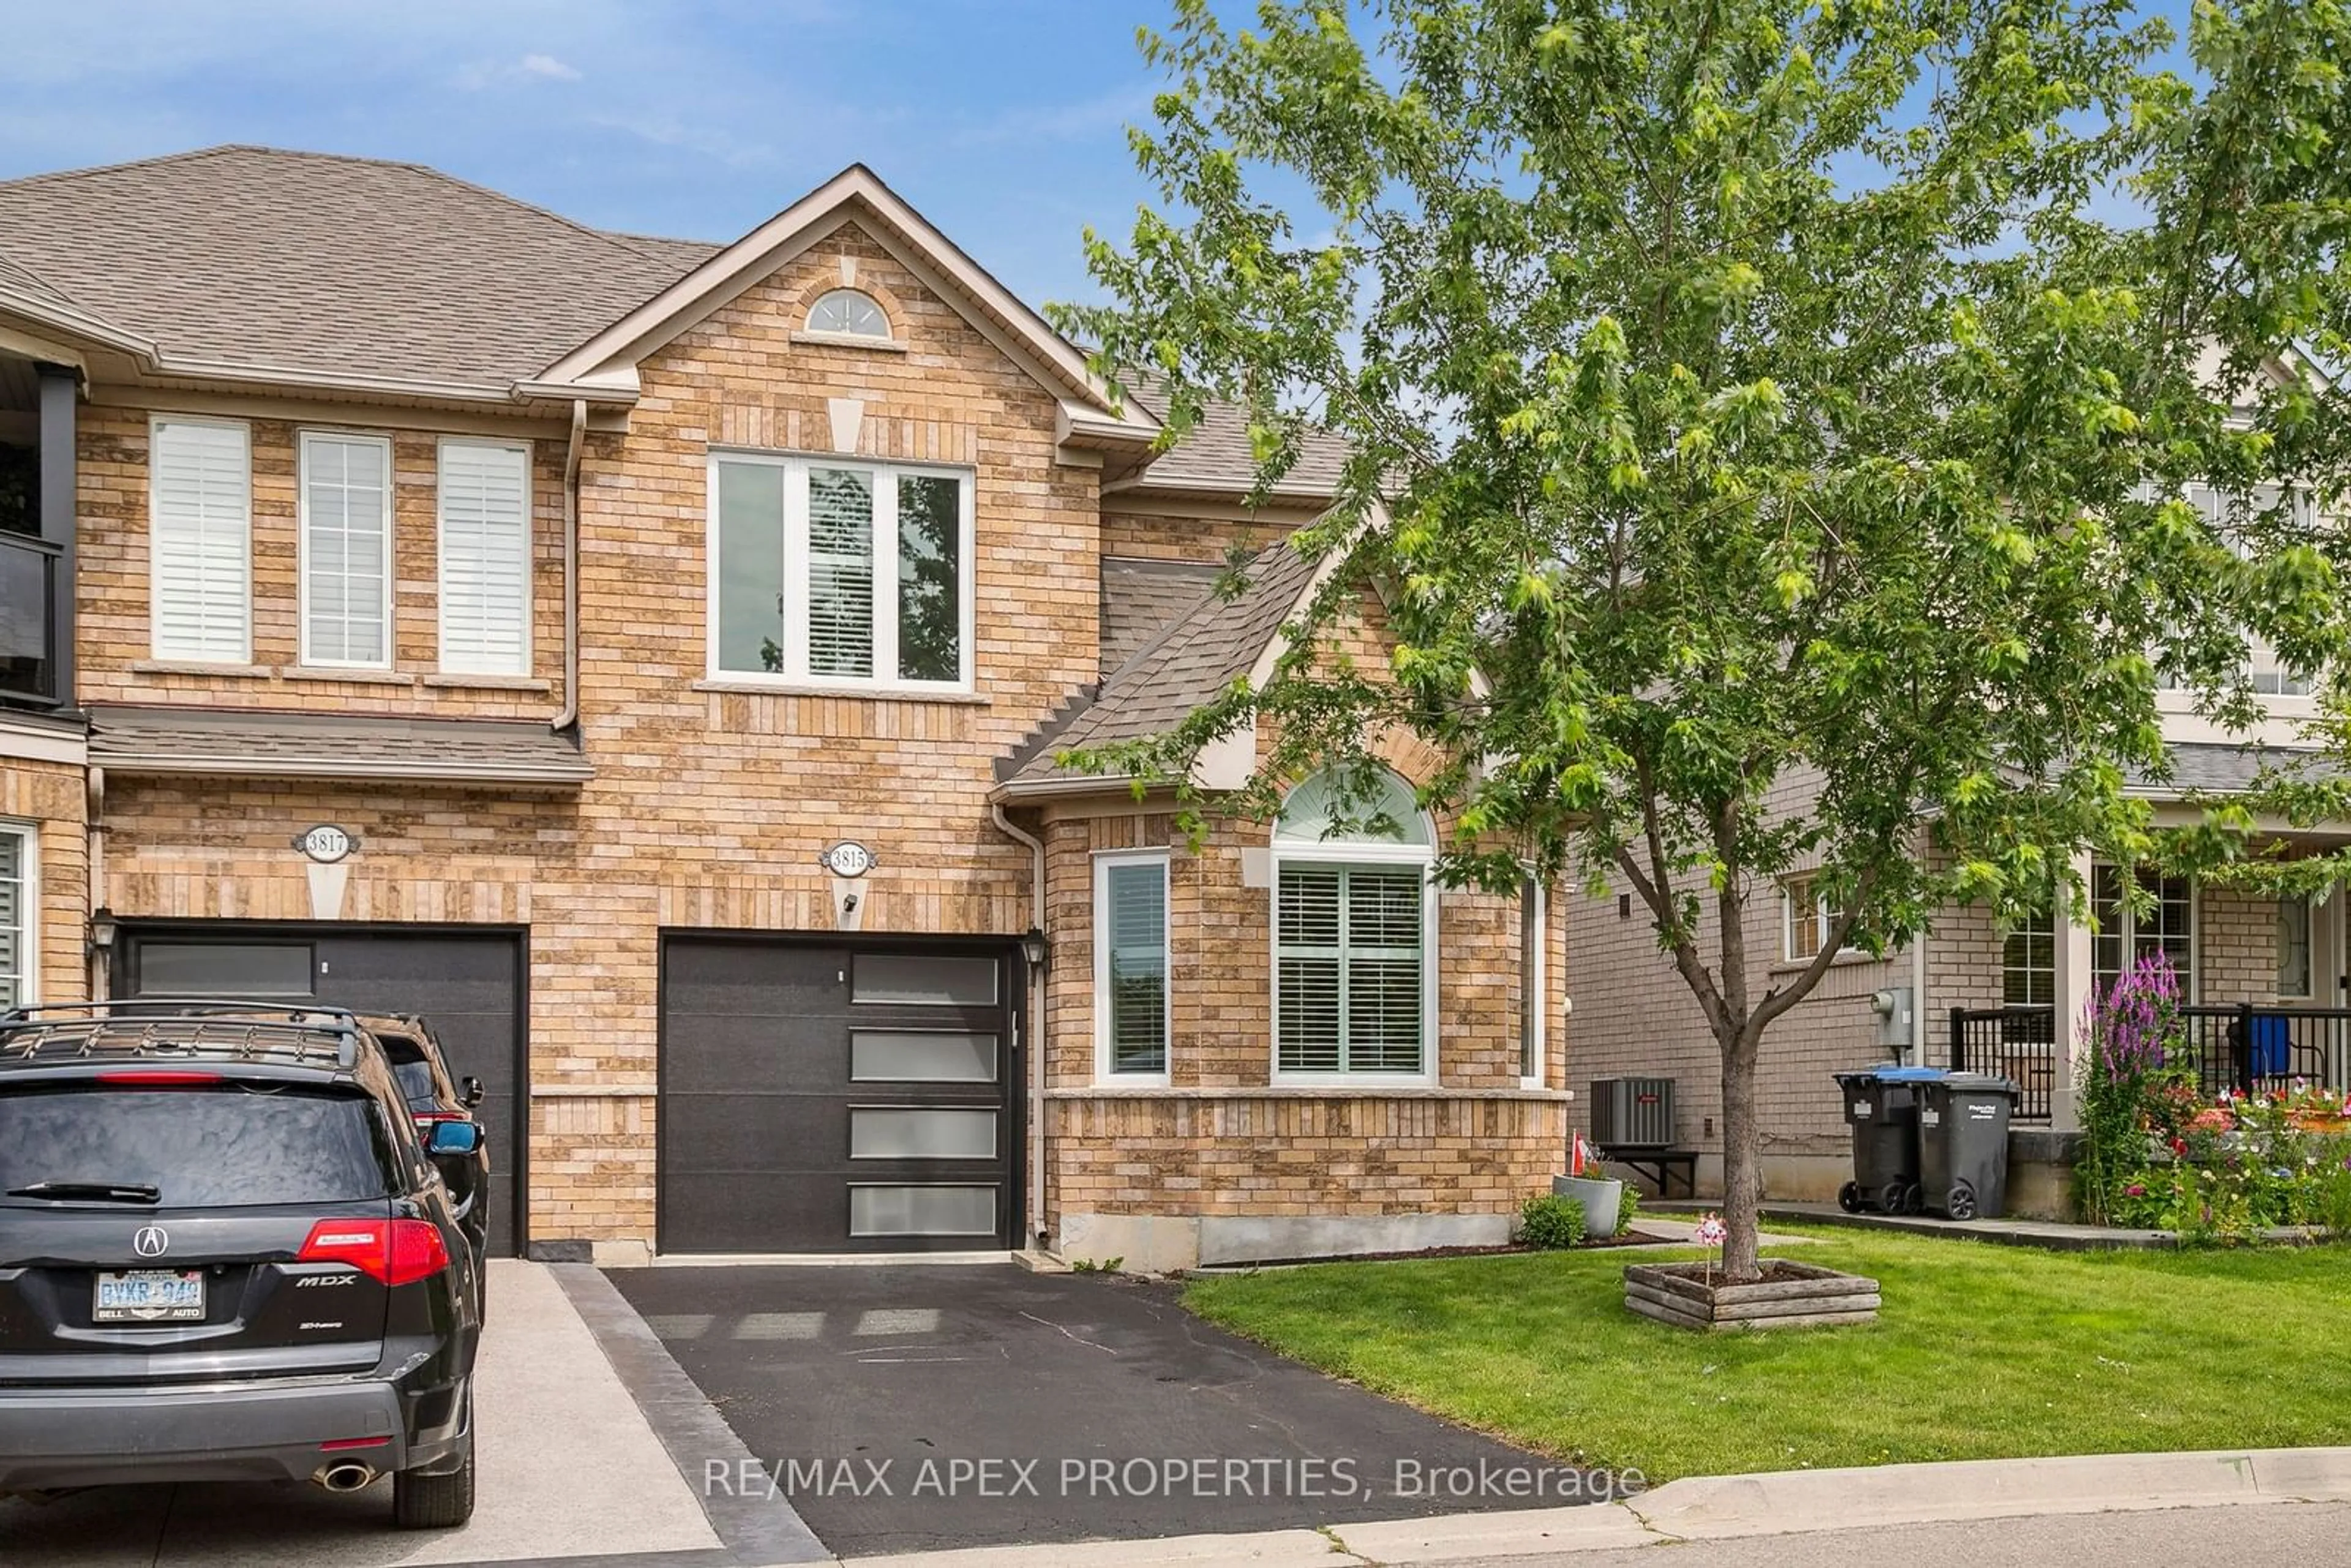 Home with brick exterior material for 3815 Talias Cres, Mississauga Ontario L5M 6L5